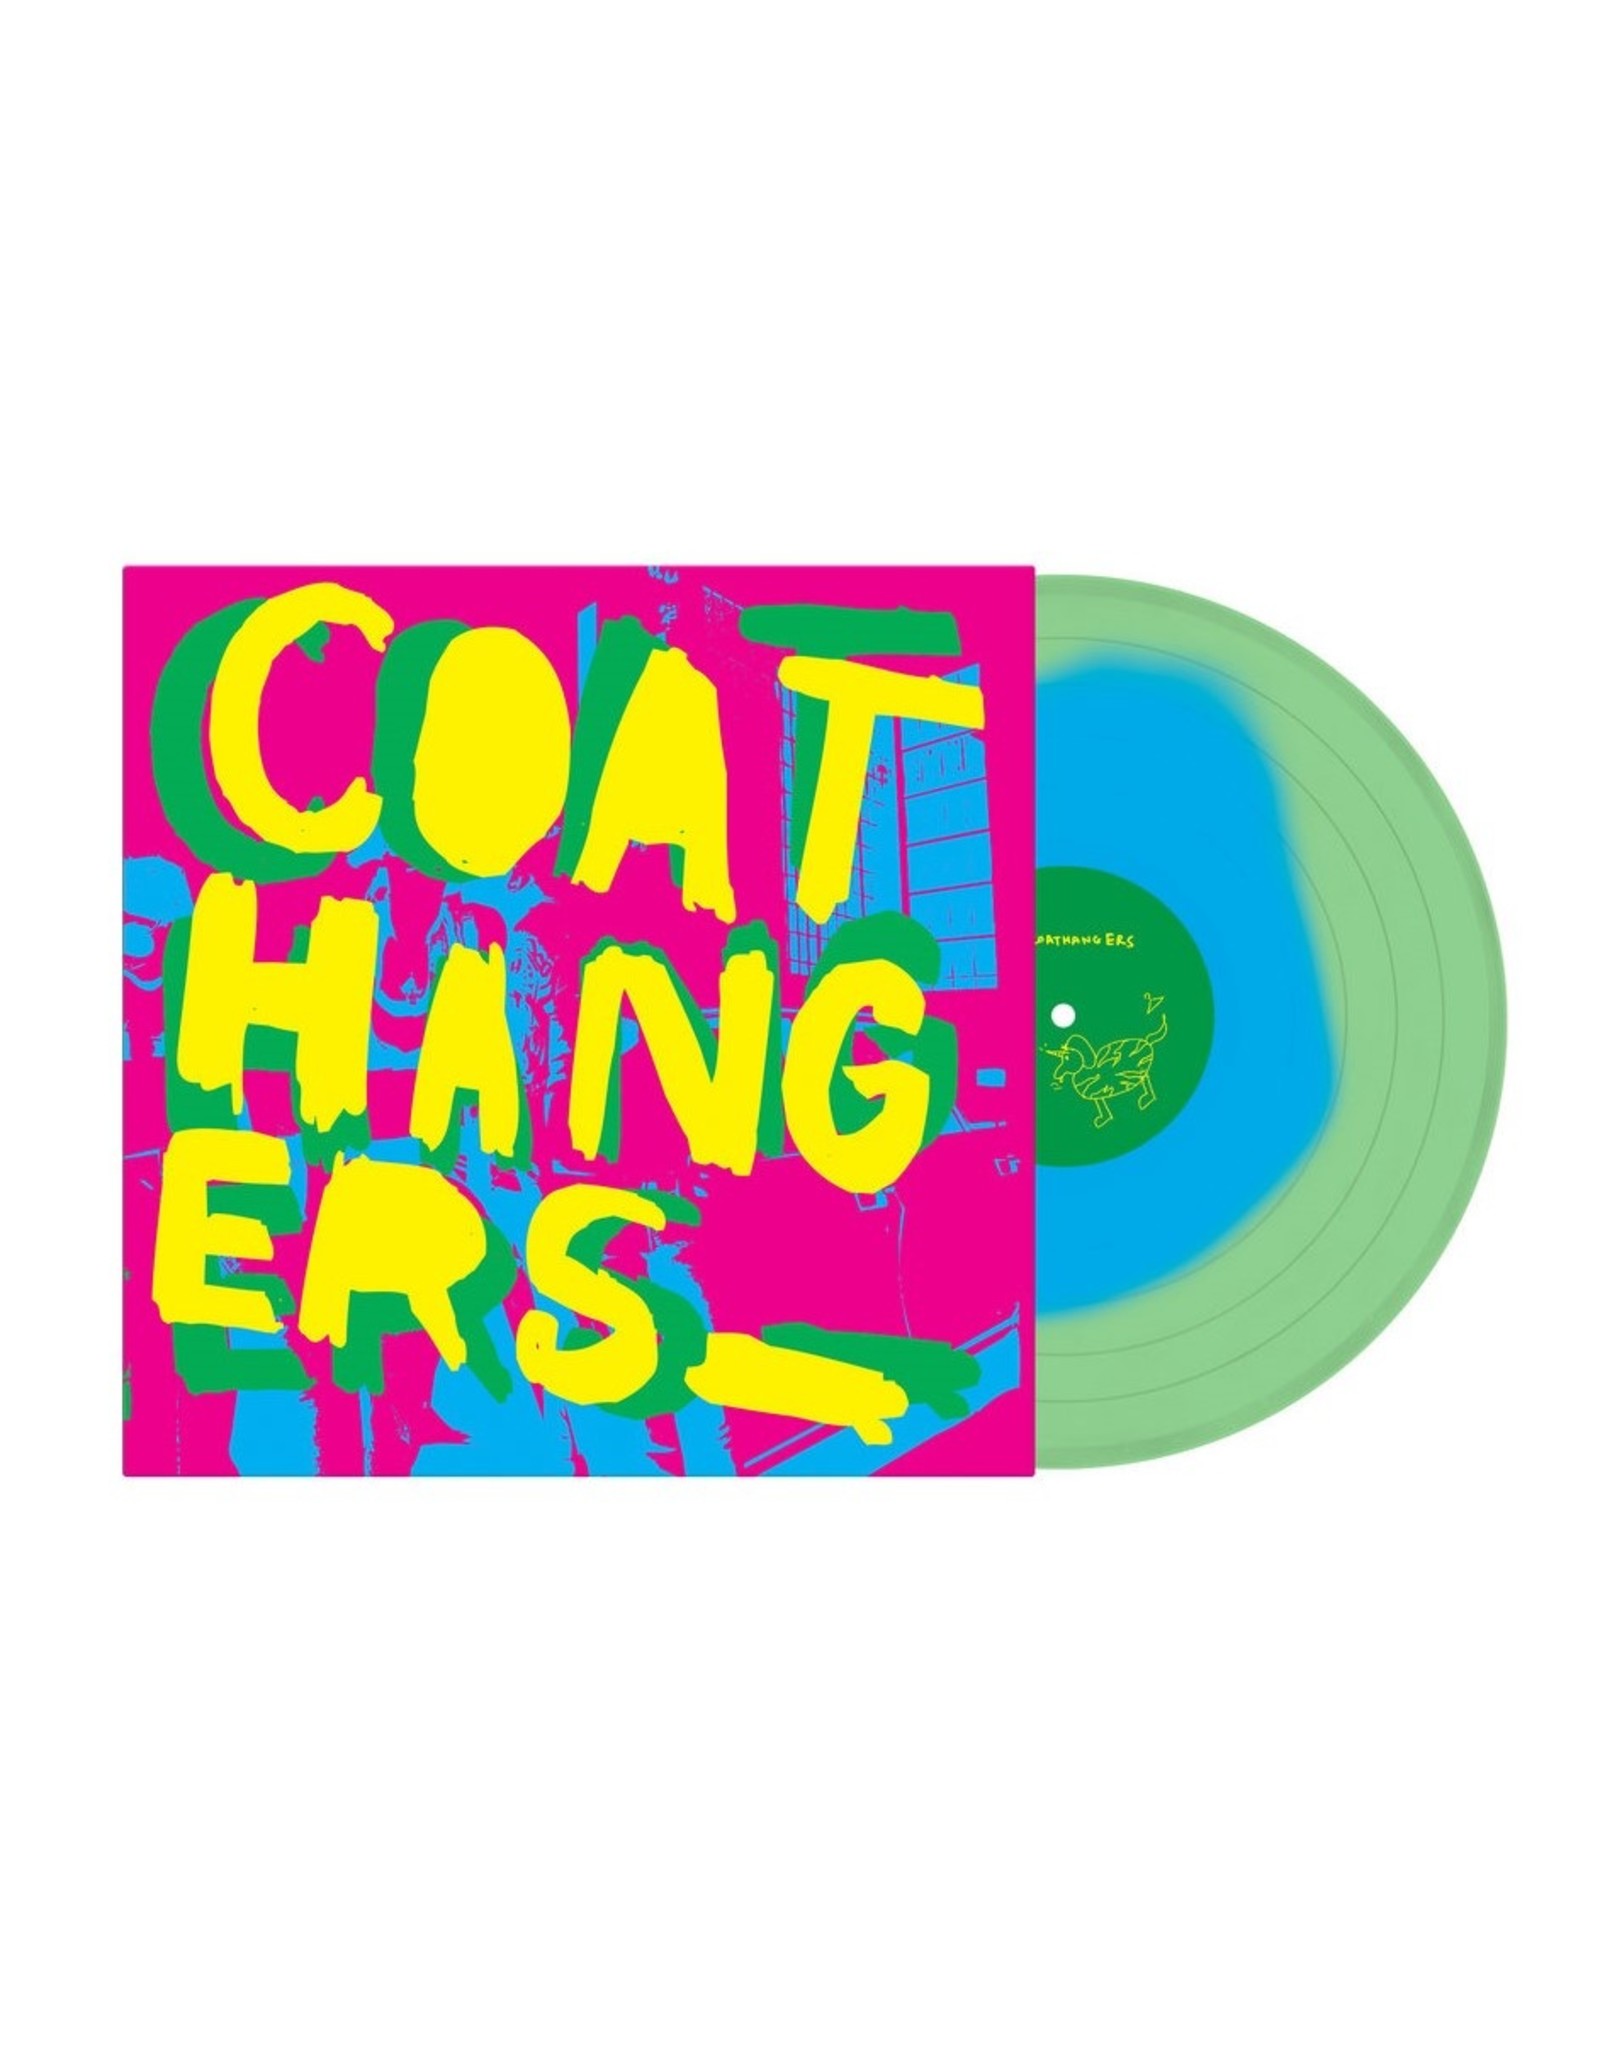 Coathangers - The Coathangers  (Deluxe Edition) [Green-in-Blue Vinyl]